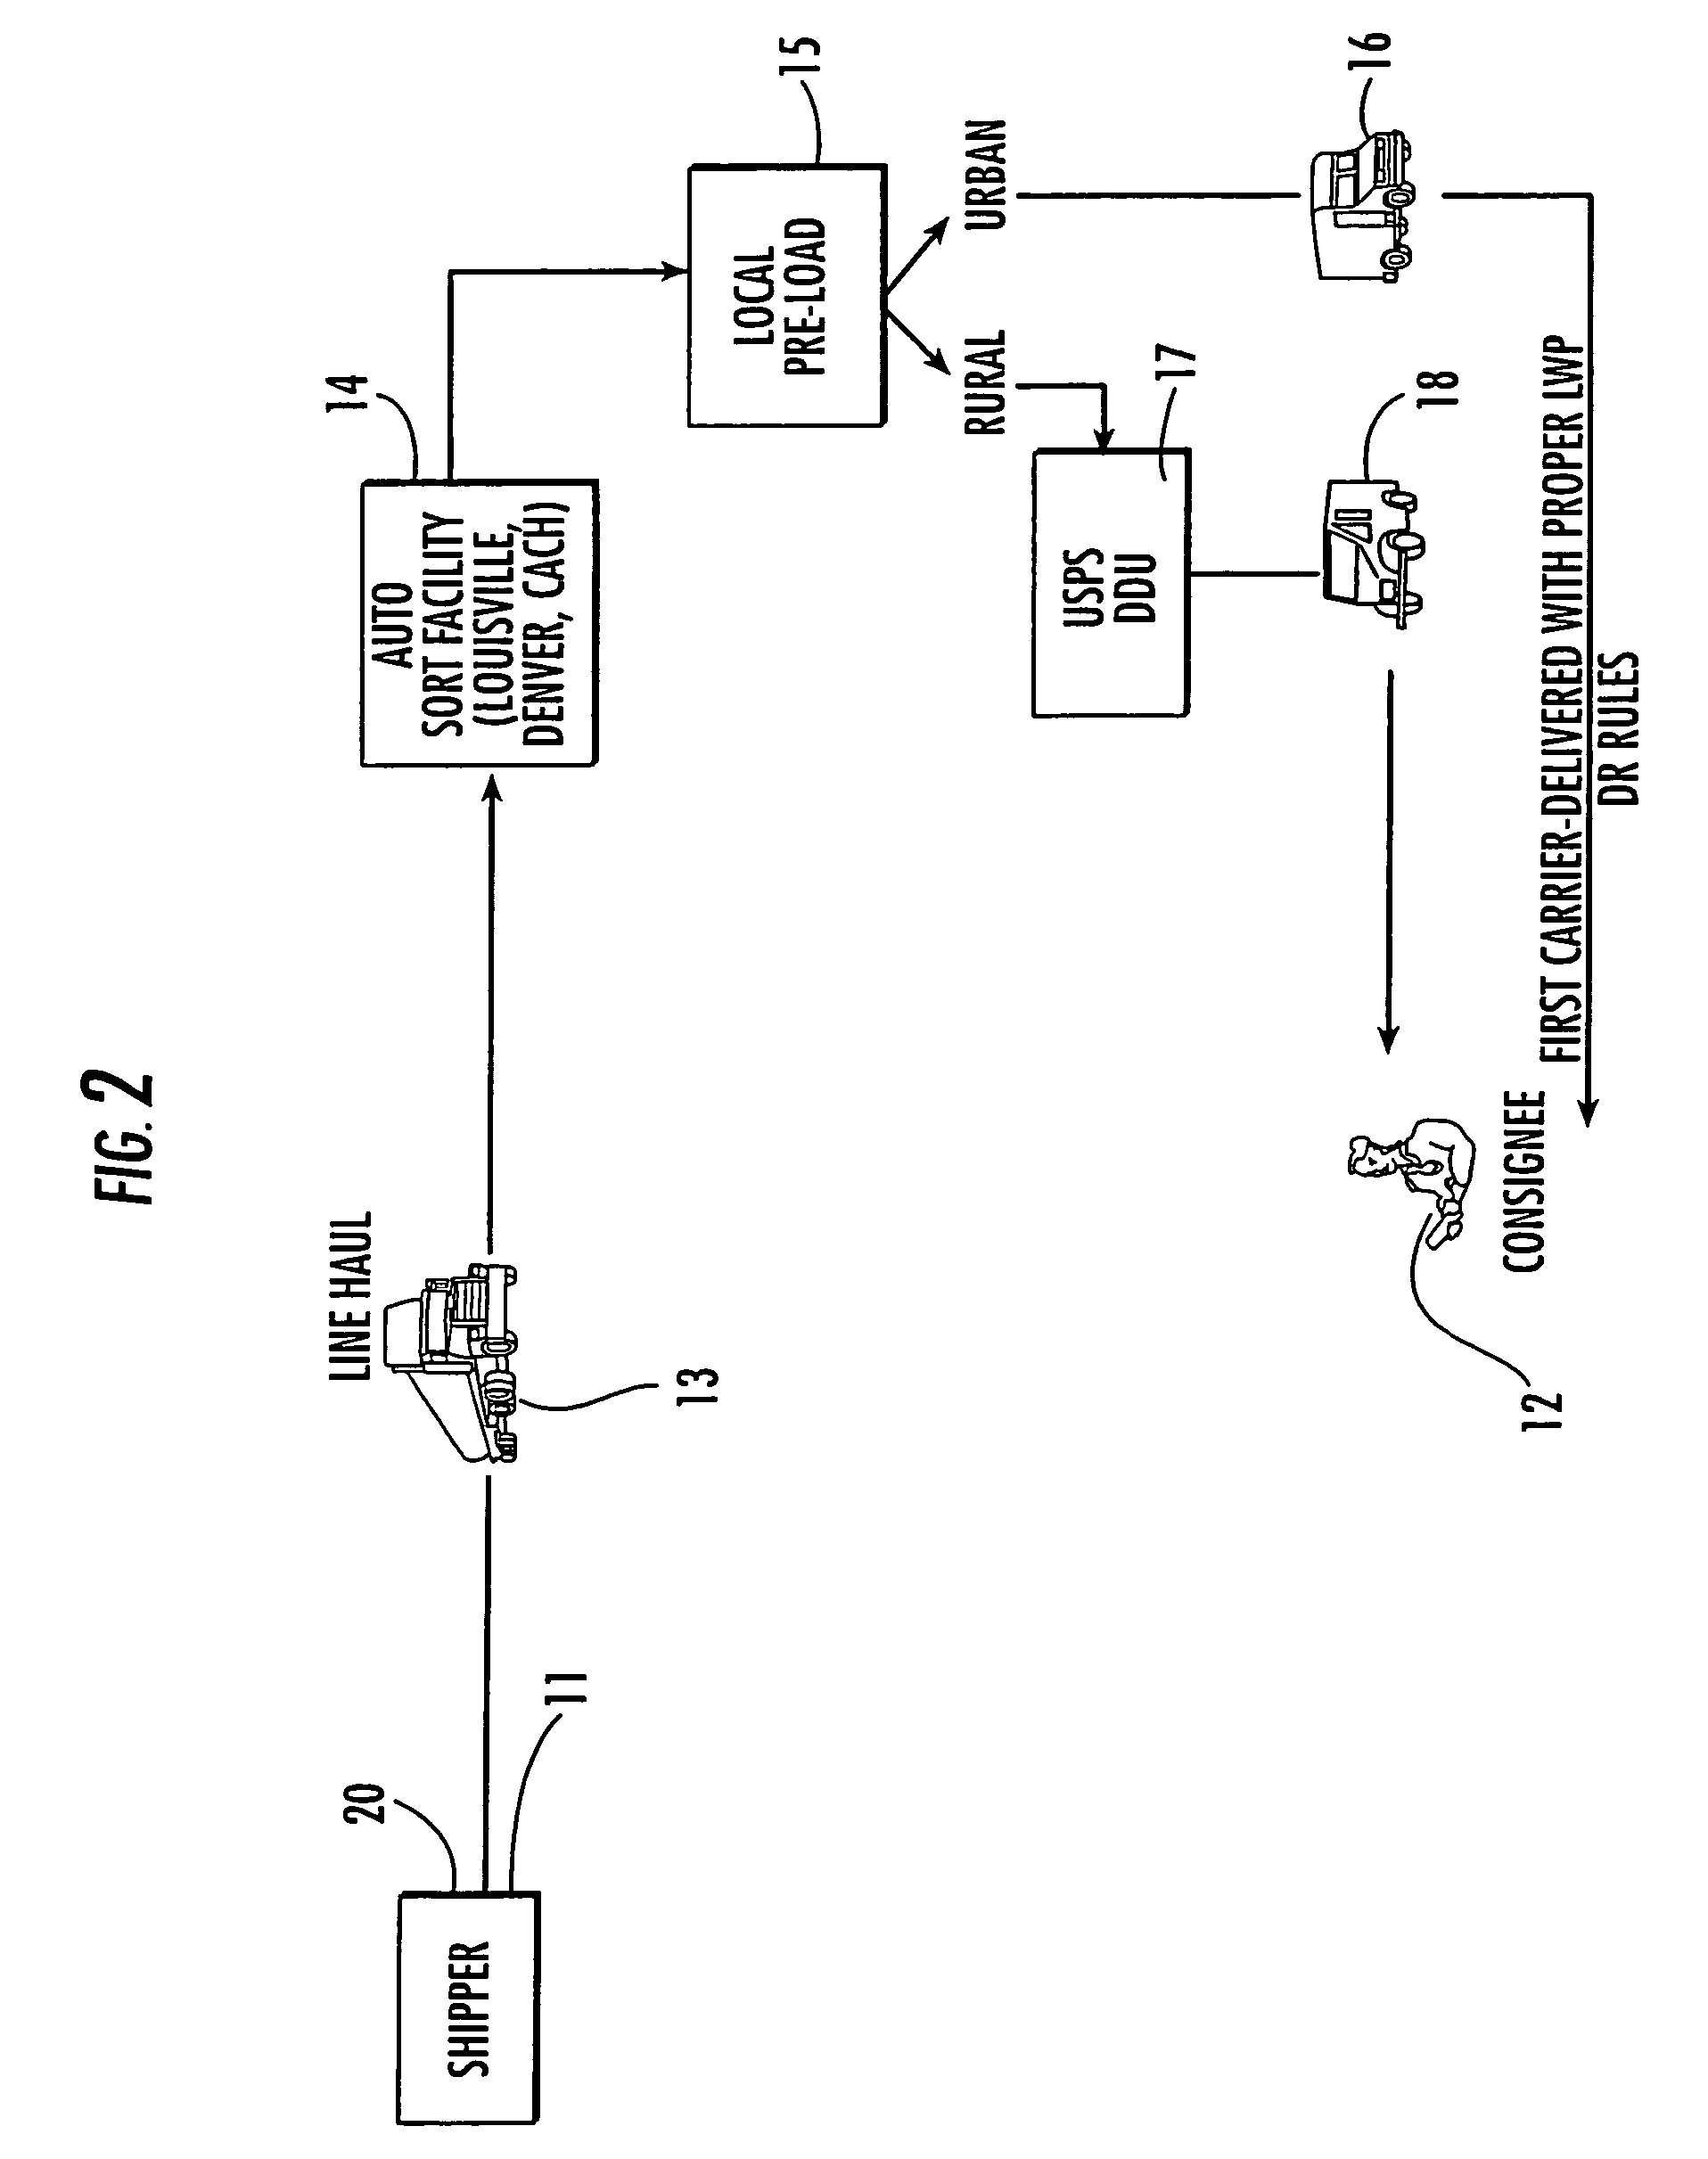 Computer system for routing package deliveries